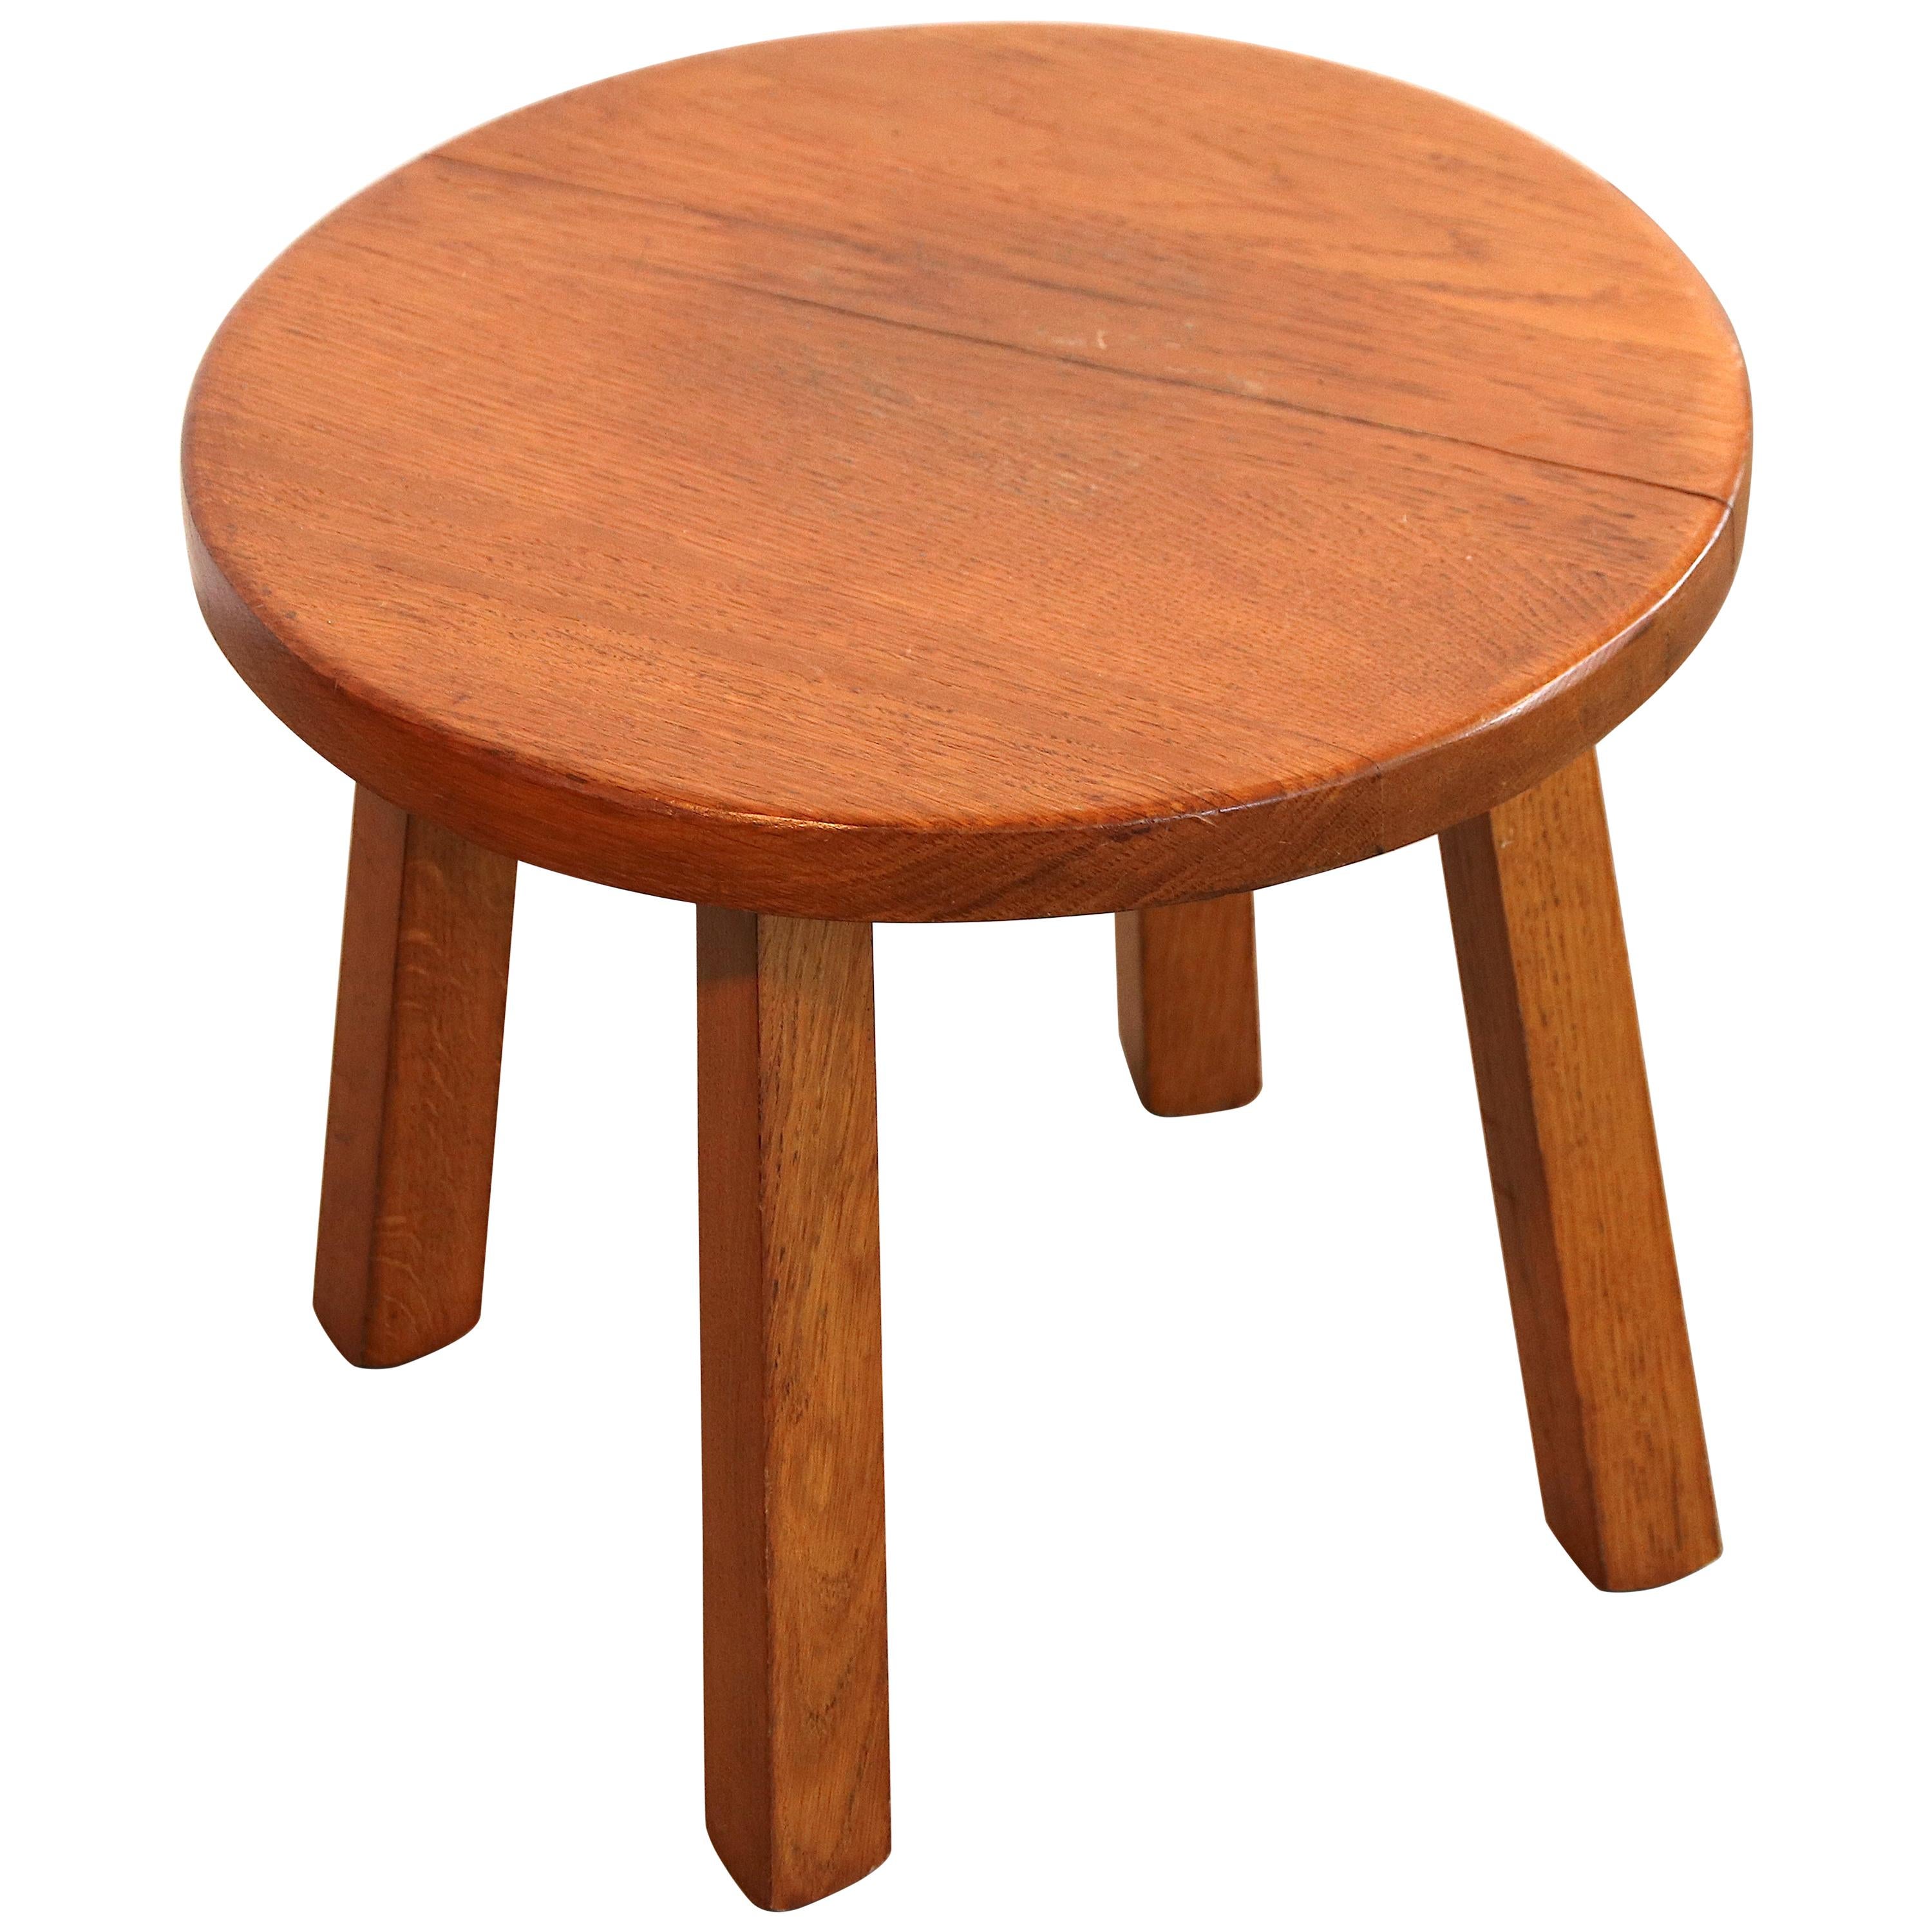 Charlotte Perriand Style French Oakwood Low Stool or Side Table